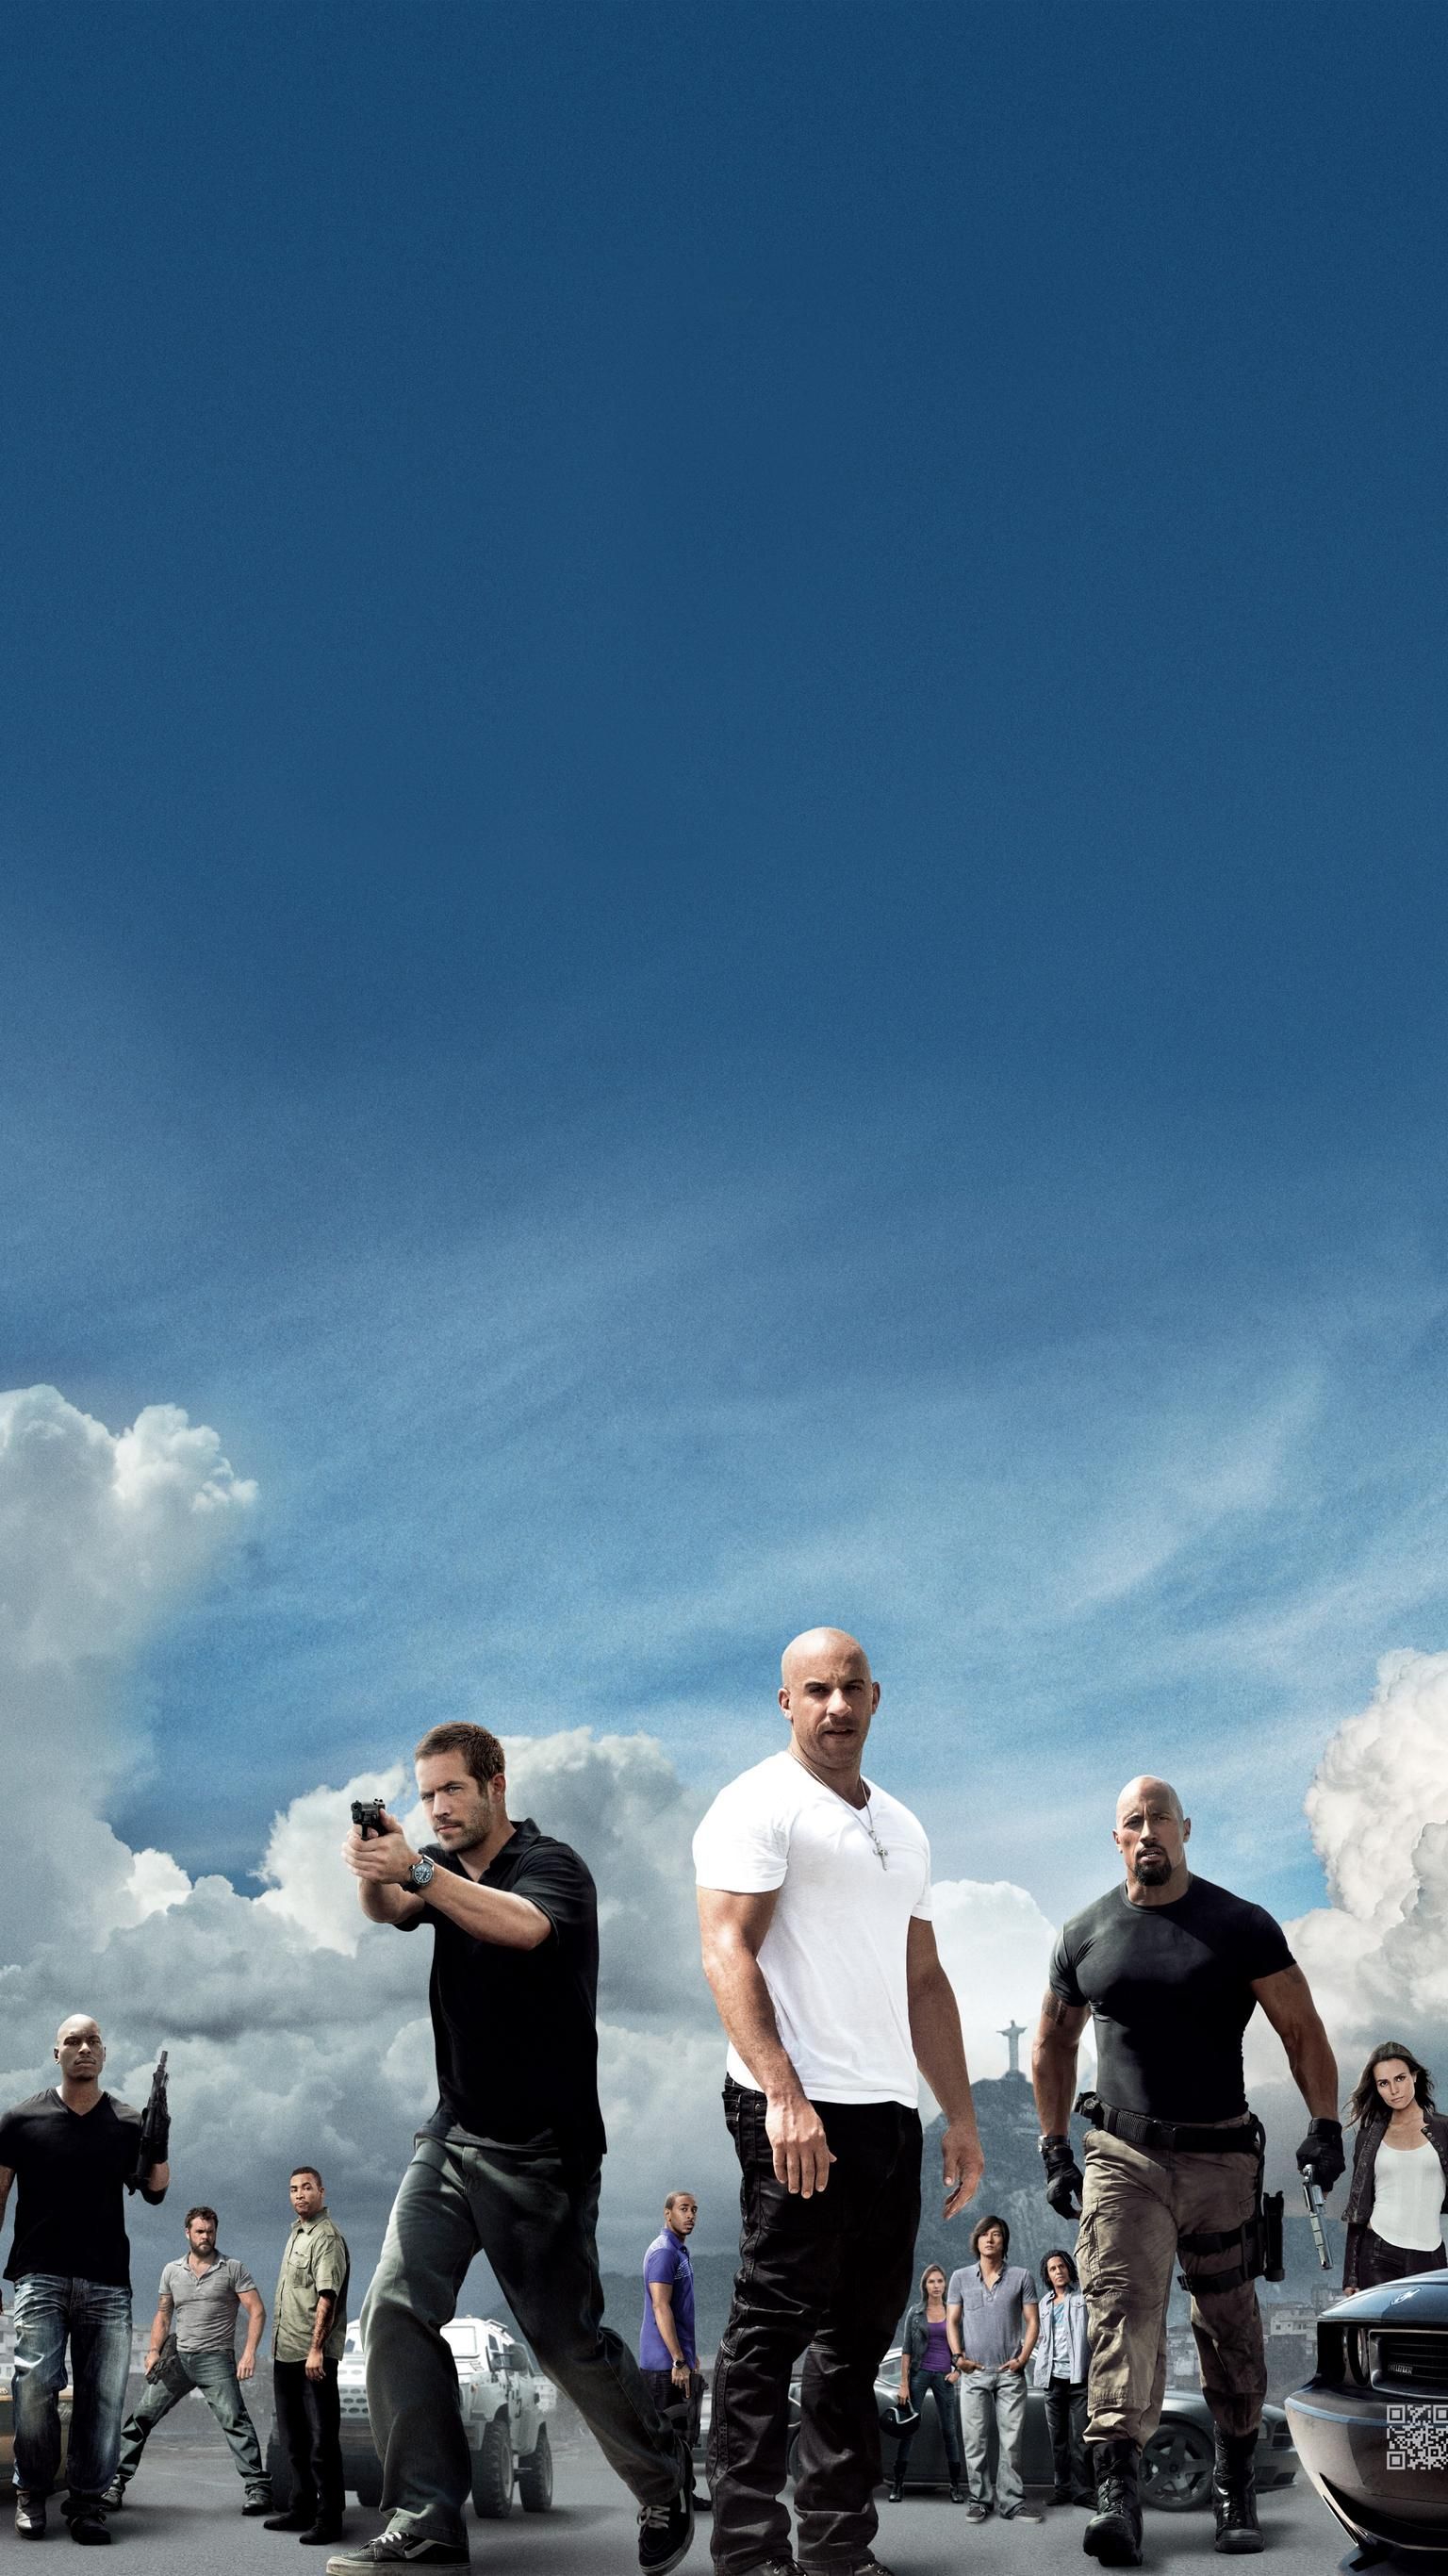 Fast Five (2011) Phone Wallpaper. Moviemania. Fast five, Fast and furious, Fast & furious 5